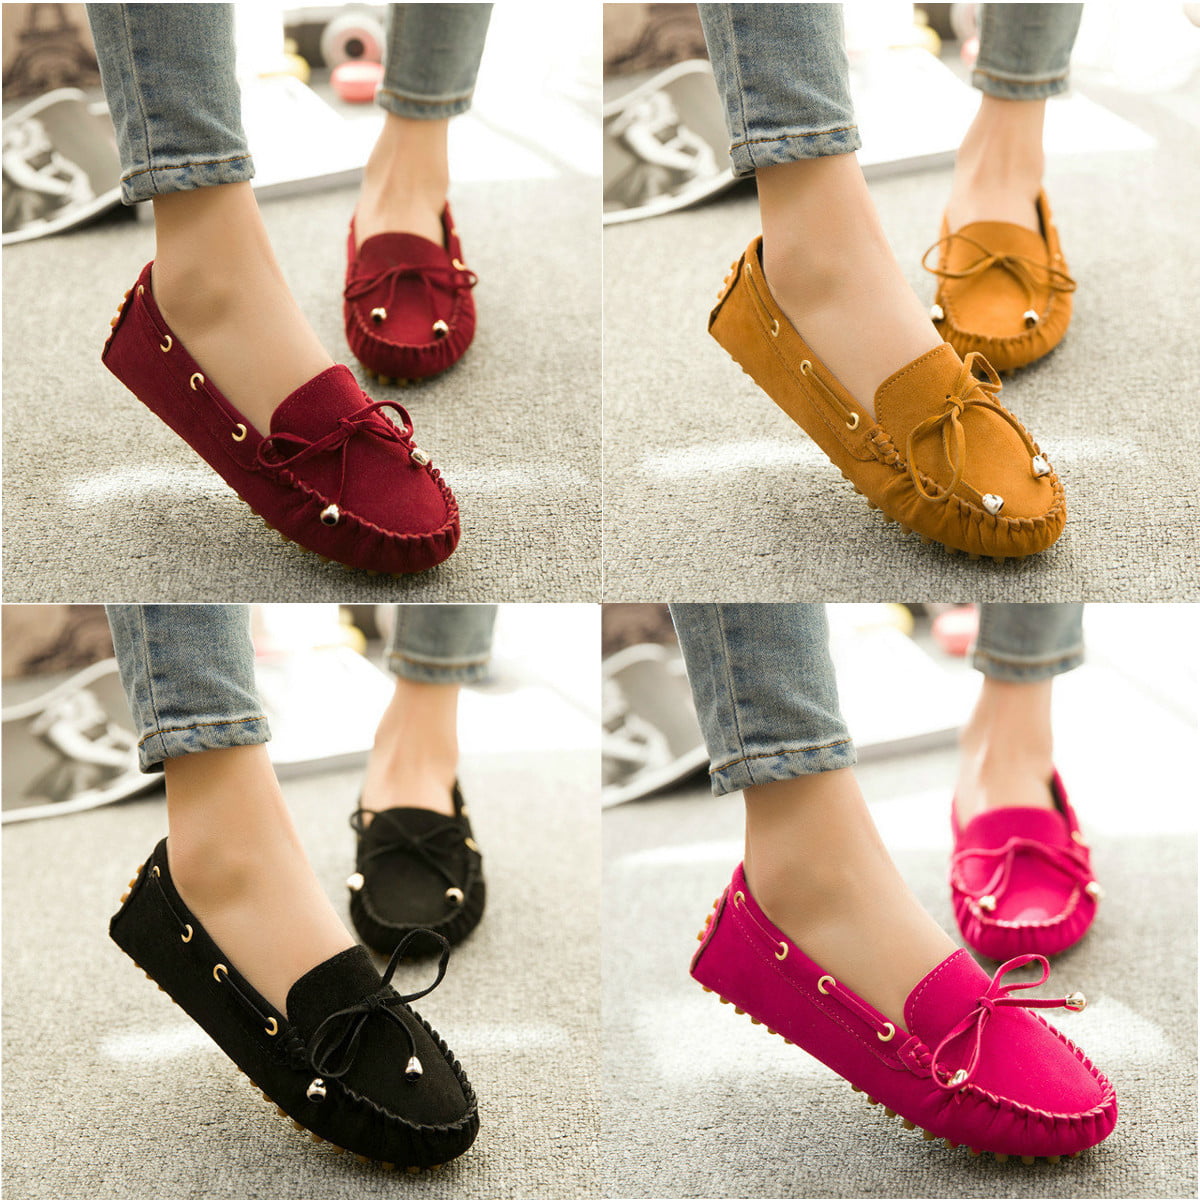 Fashion Womens Casual Loafers Moccasin Suede Ballerina Ballet Slip On Flat Shoes 